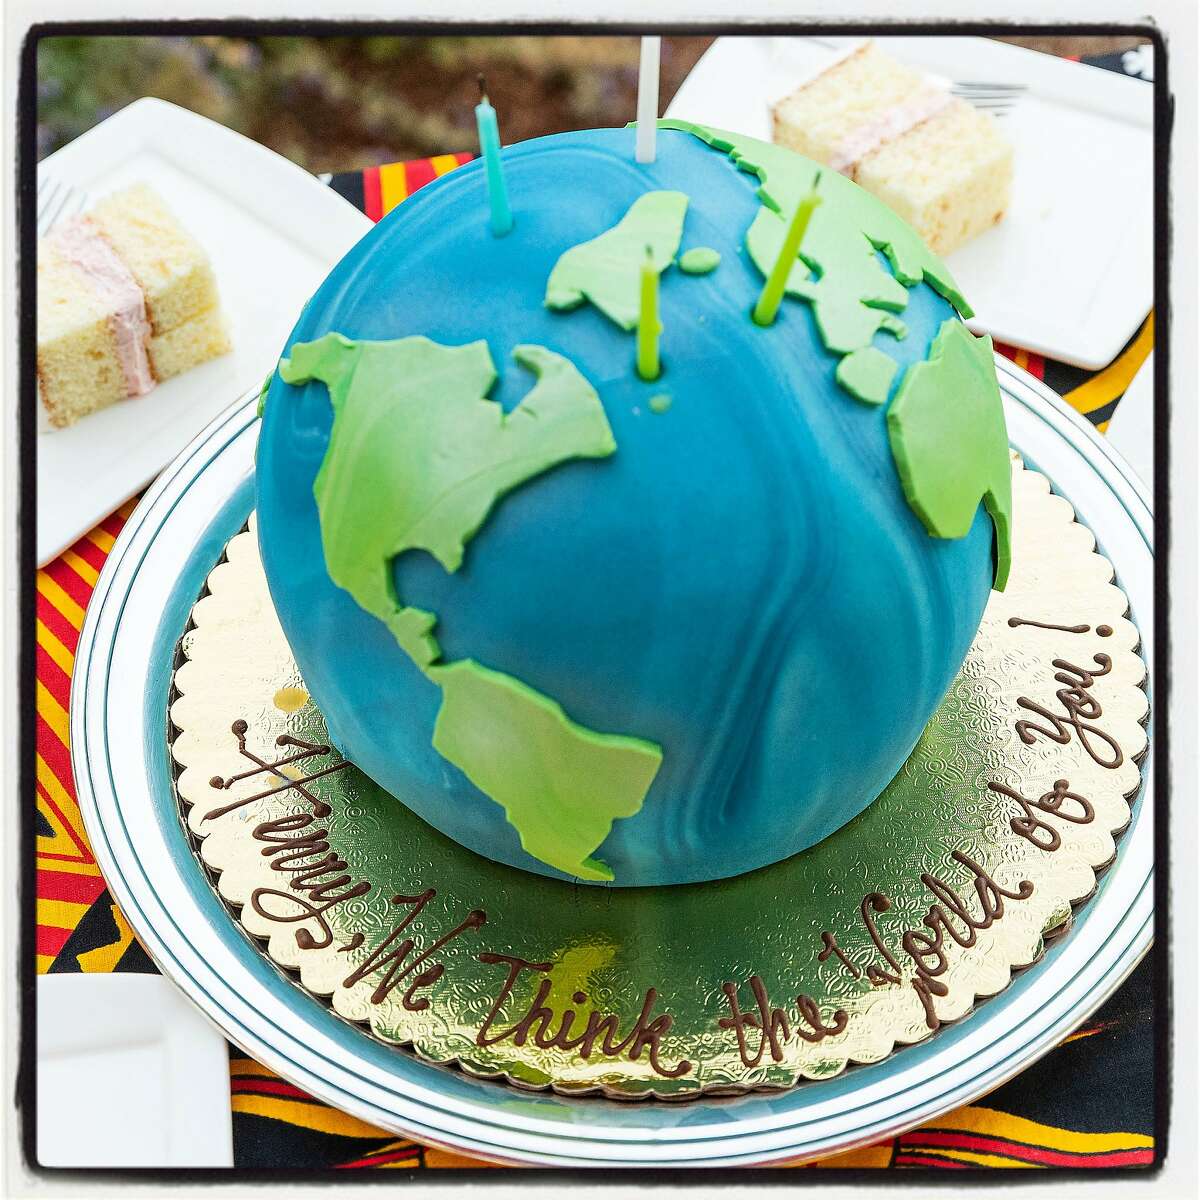 McCall's Catering created a globe-shaped cake to honor the 95th birthday of Henry Kissinger. July 19, 2018.